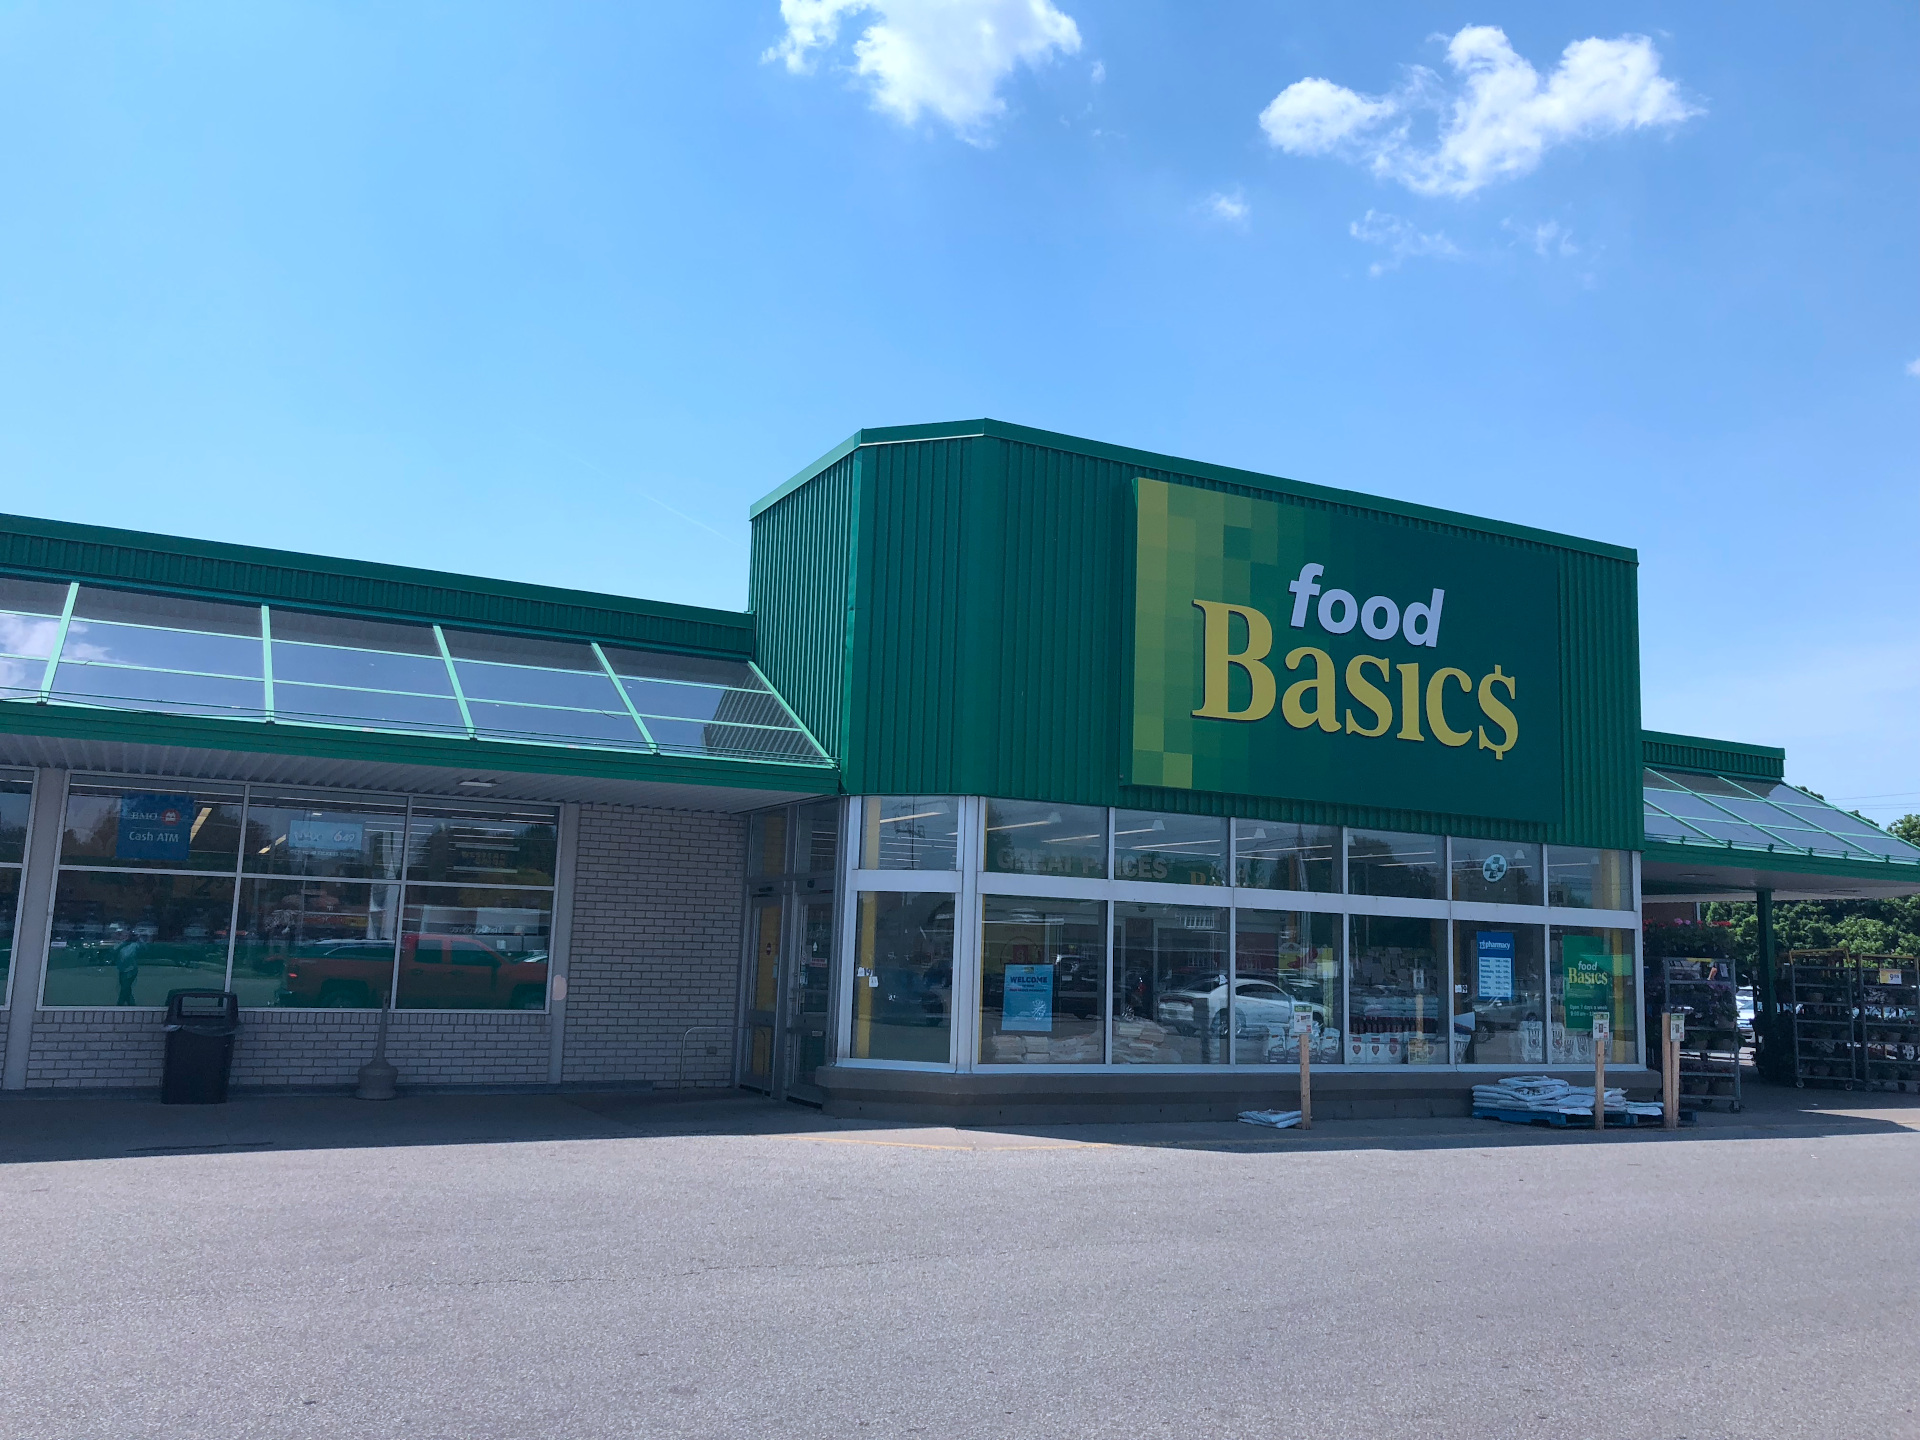 Skyline Retail REIT Acquires Additional Property in Chatham, ON